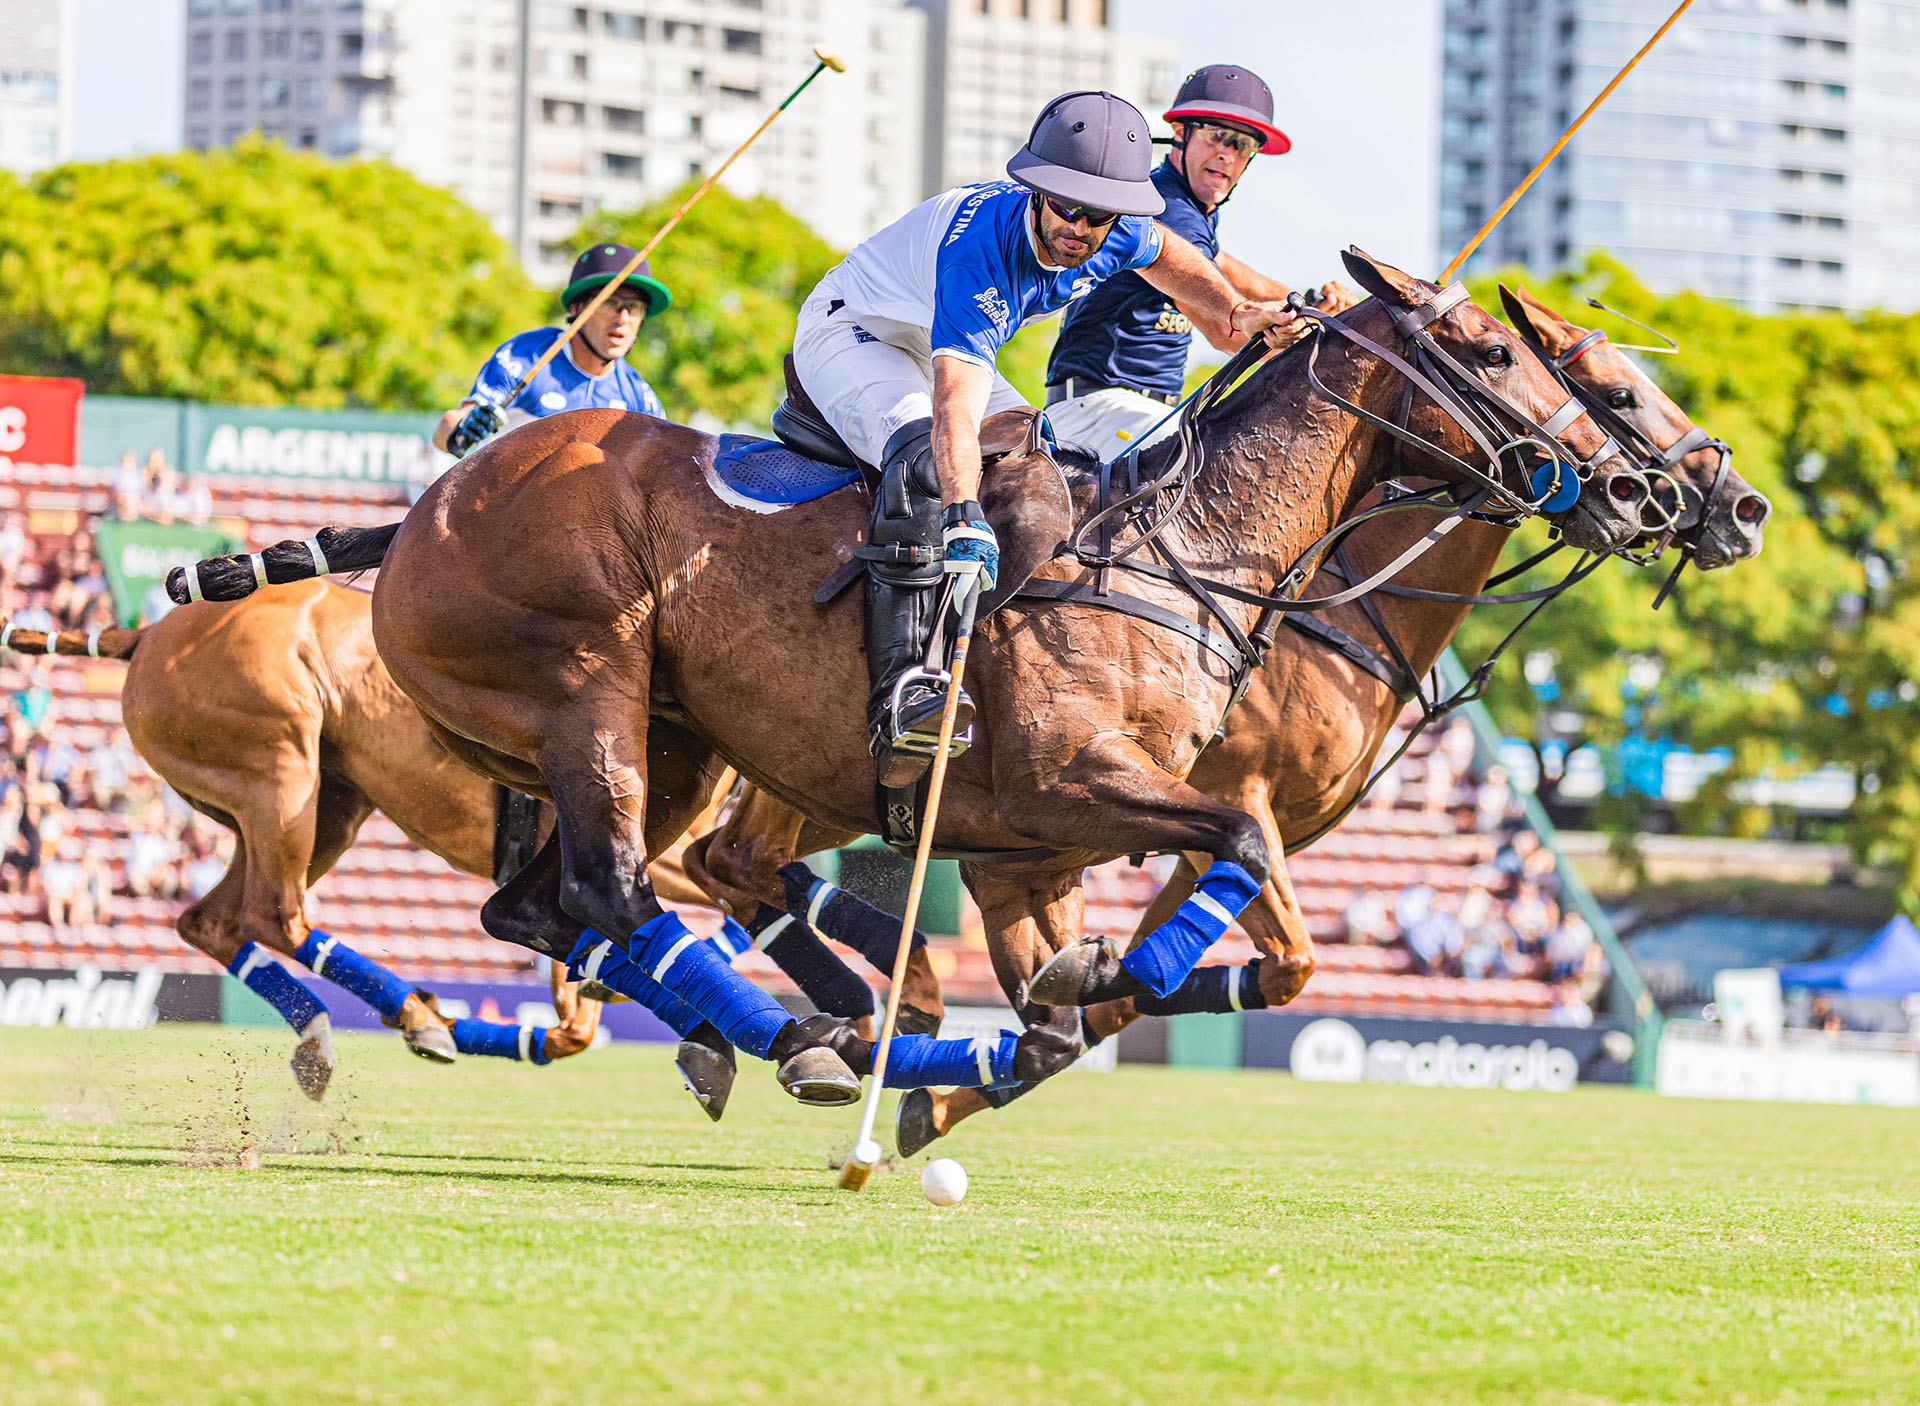 BEHIND THE SCENES: Becoming more urban and popular, polo’s plan to return to the Olympics